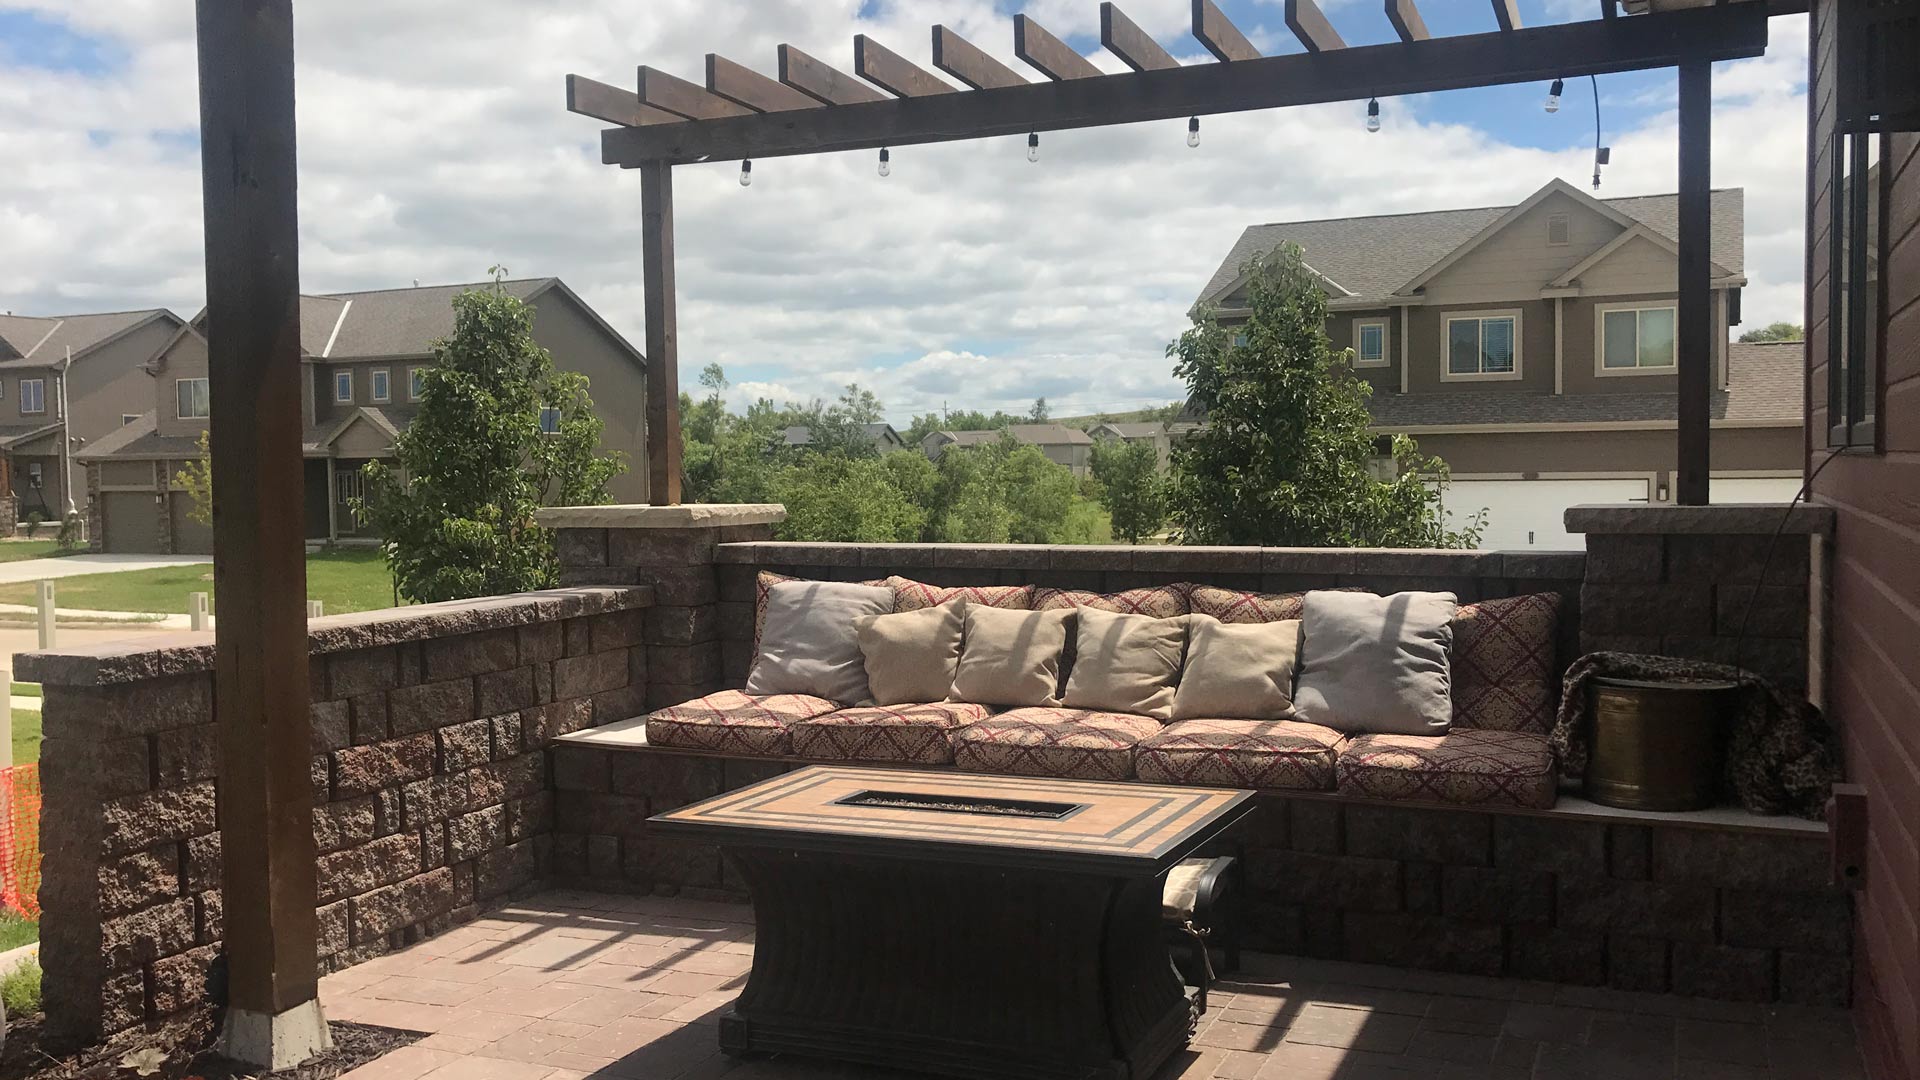 Pergola installed with fire feature and patio with retaining wall in Omaha, NE.